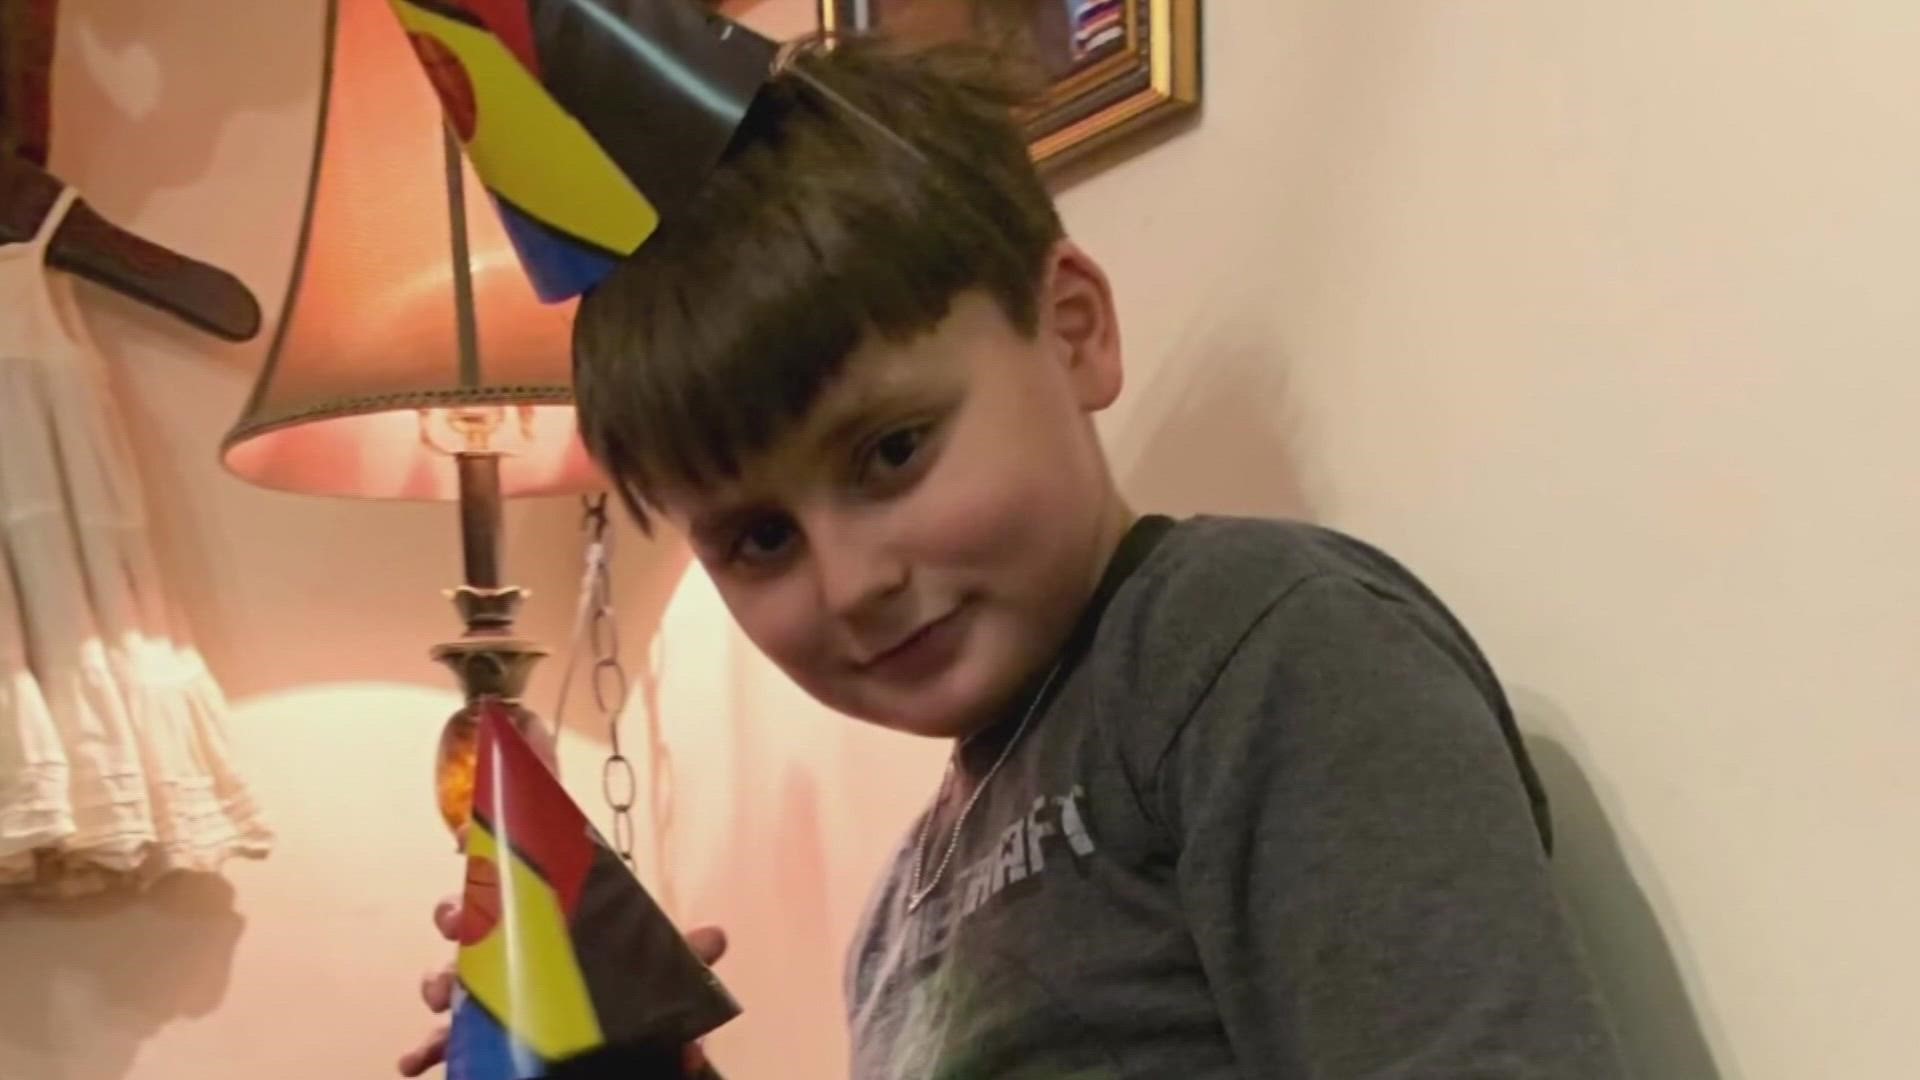 The Big Walnut is rallying around Kenny Zedekar, an 11-year-old boy who has been in the hospital since being struck by the tires of a trailer during a parade.